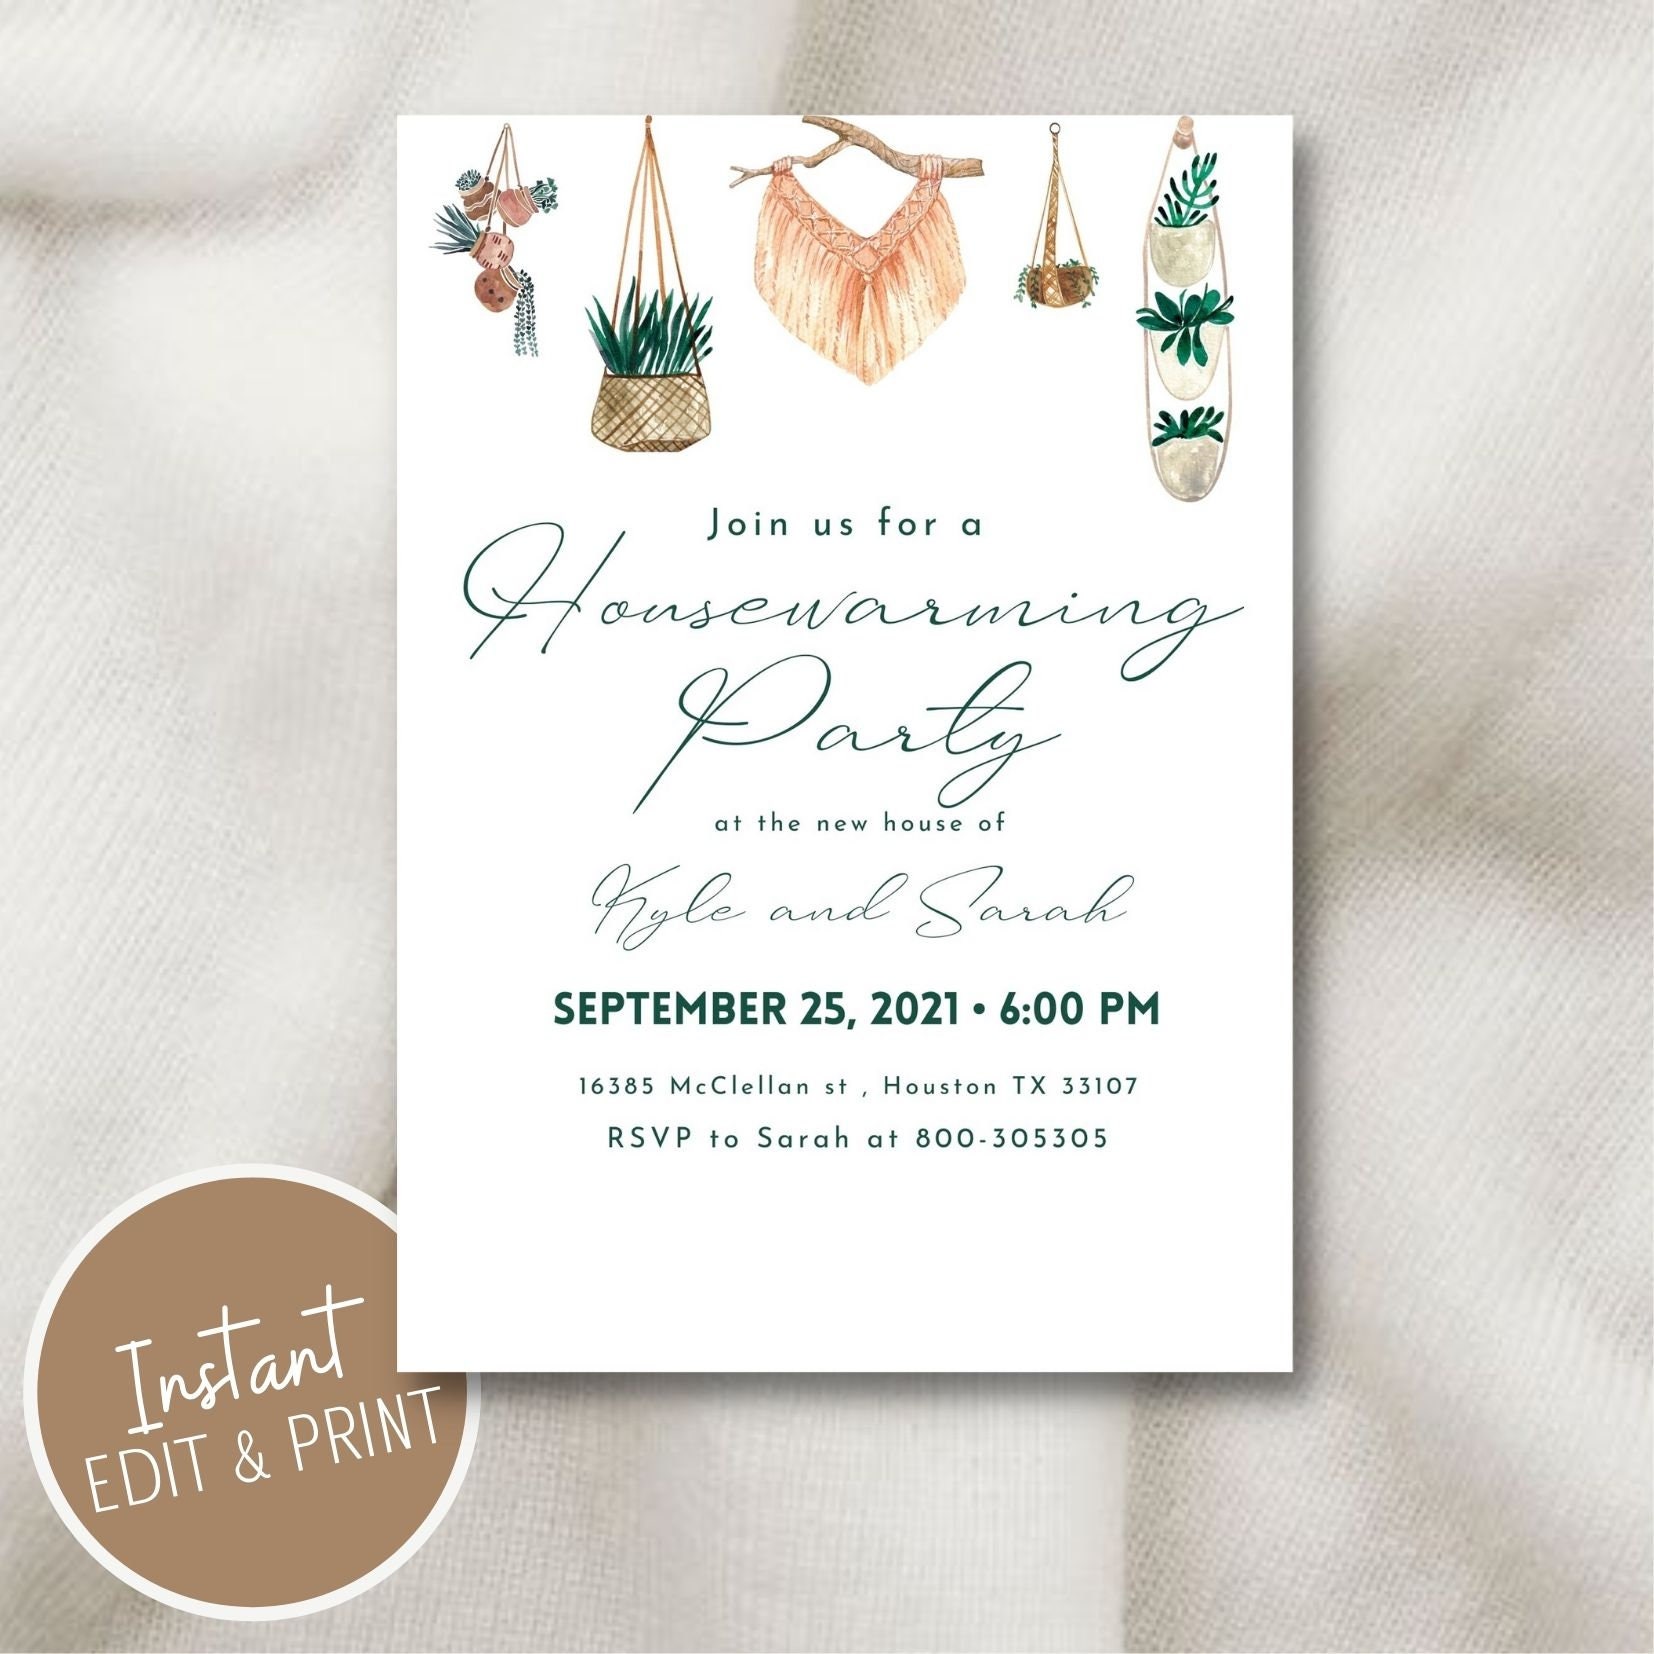 Housewarming Party Invitation, House Warming Shower for Newly Married  Couple, New Home Announcement, Succulent Open House Digital Invite 